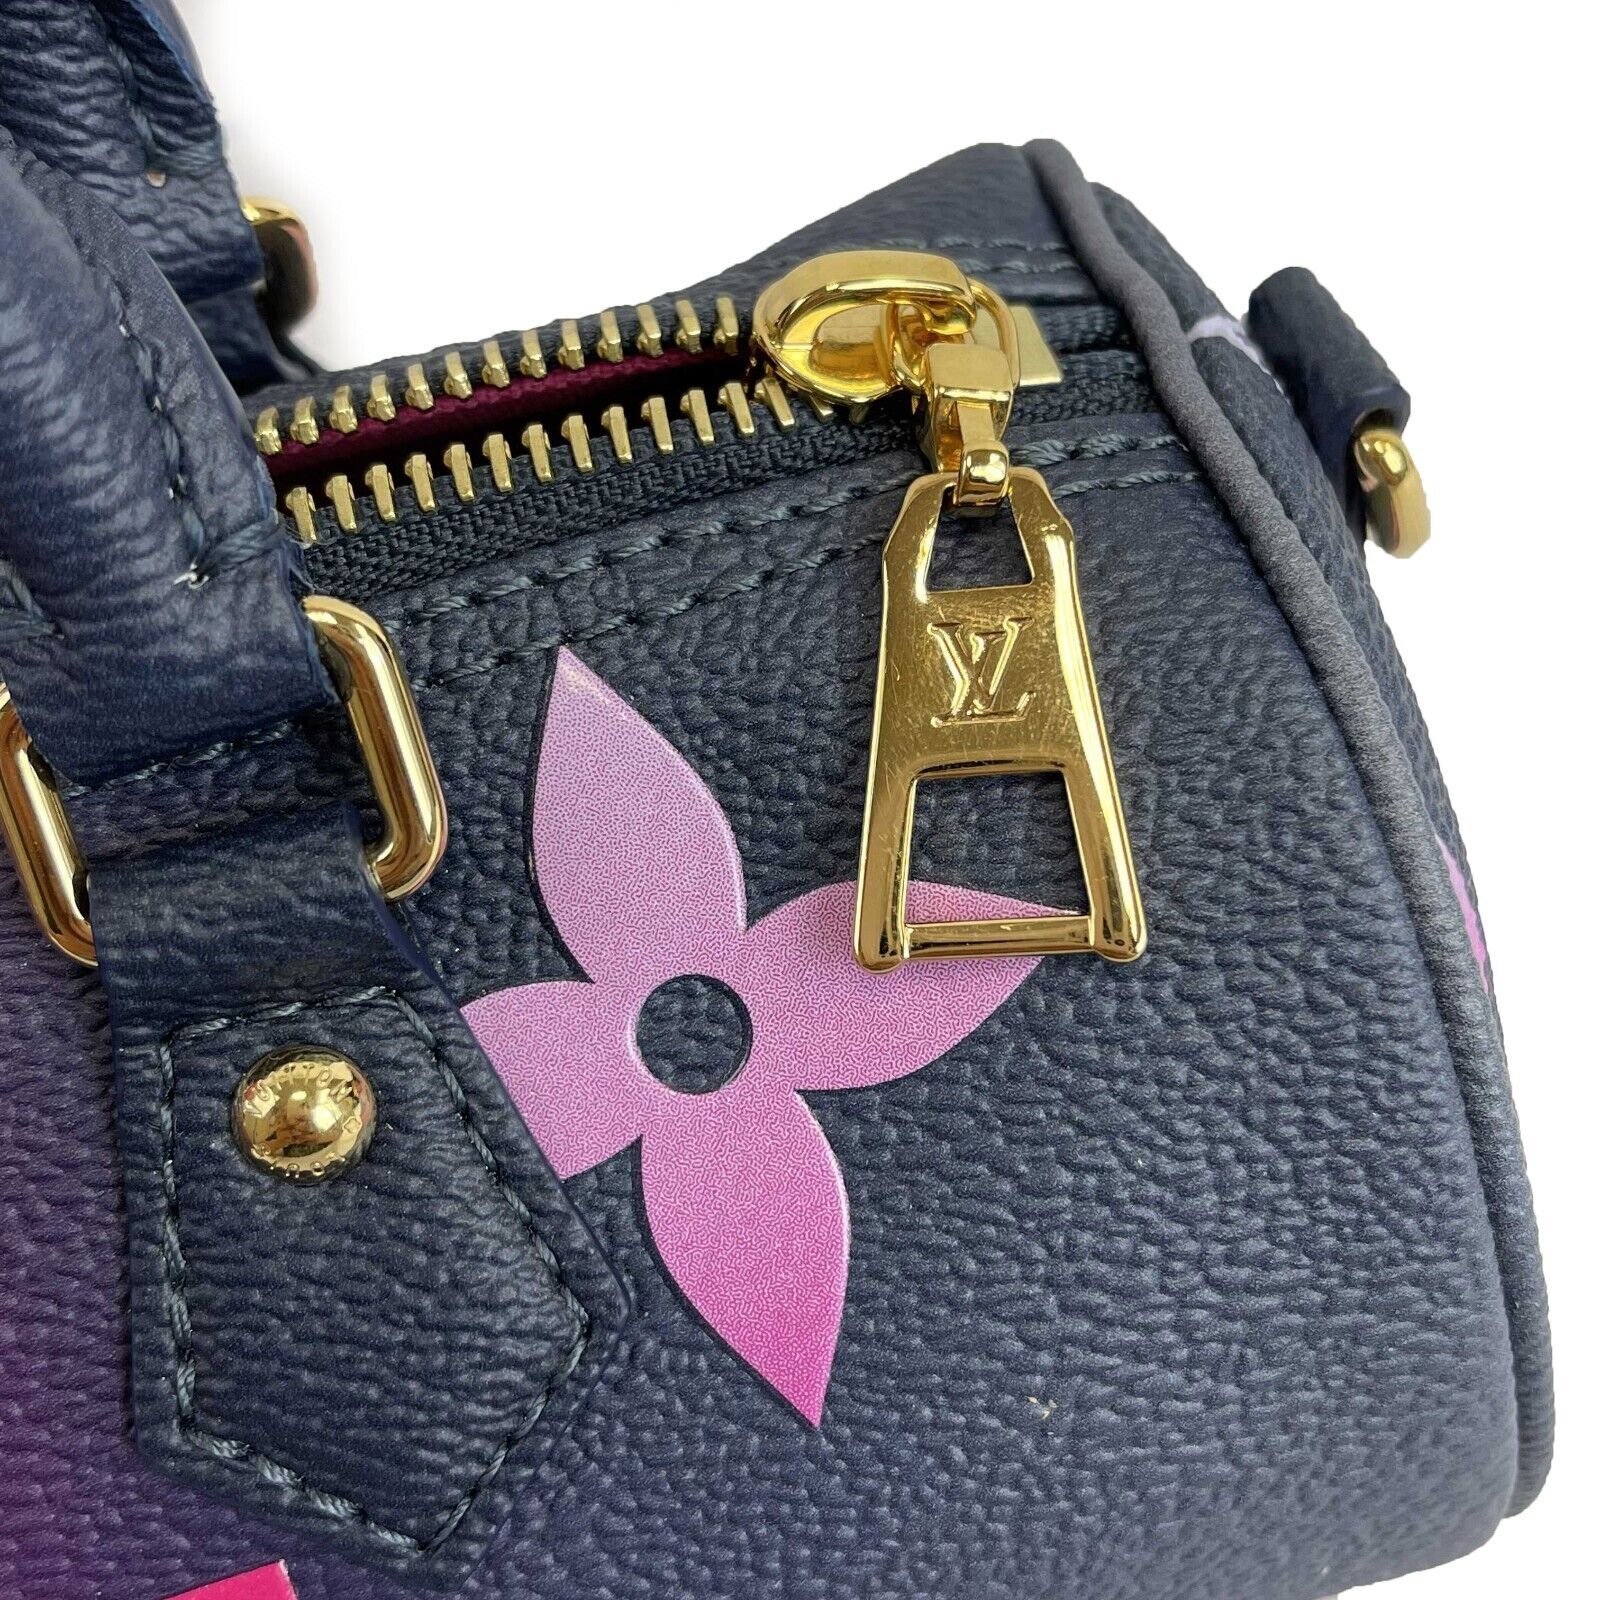 PAPILLON BB Shoulder Bags Midnight Fuchsia M59860 Sunrise Pastel M46078  Designer Spring In The City Women Handle Bag With Coin Purse Summer From  Luxurybags0923, $76.23